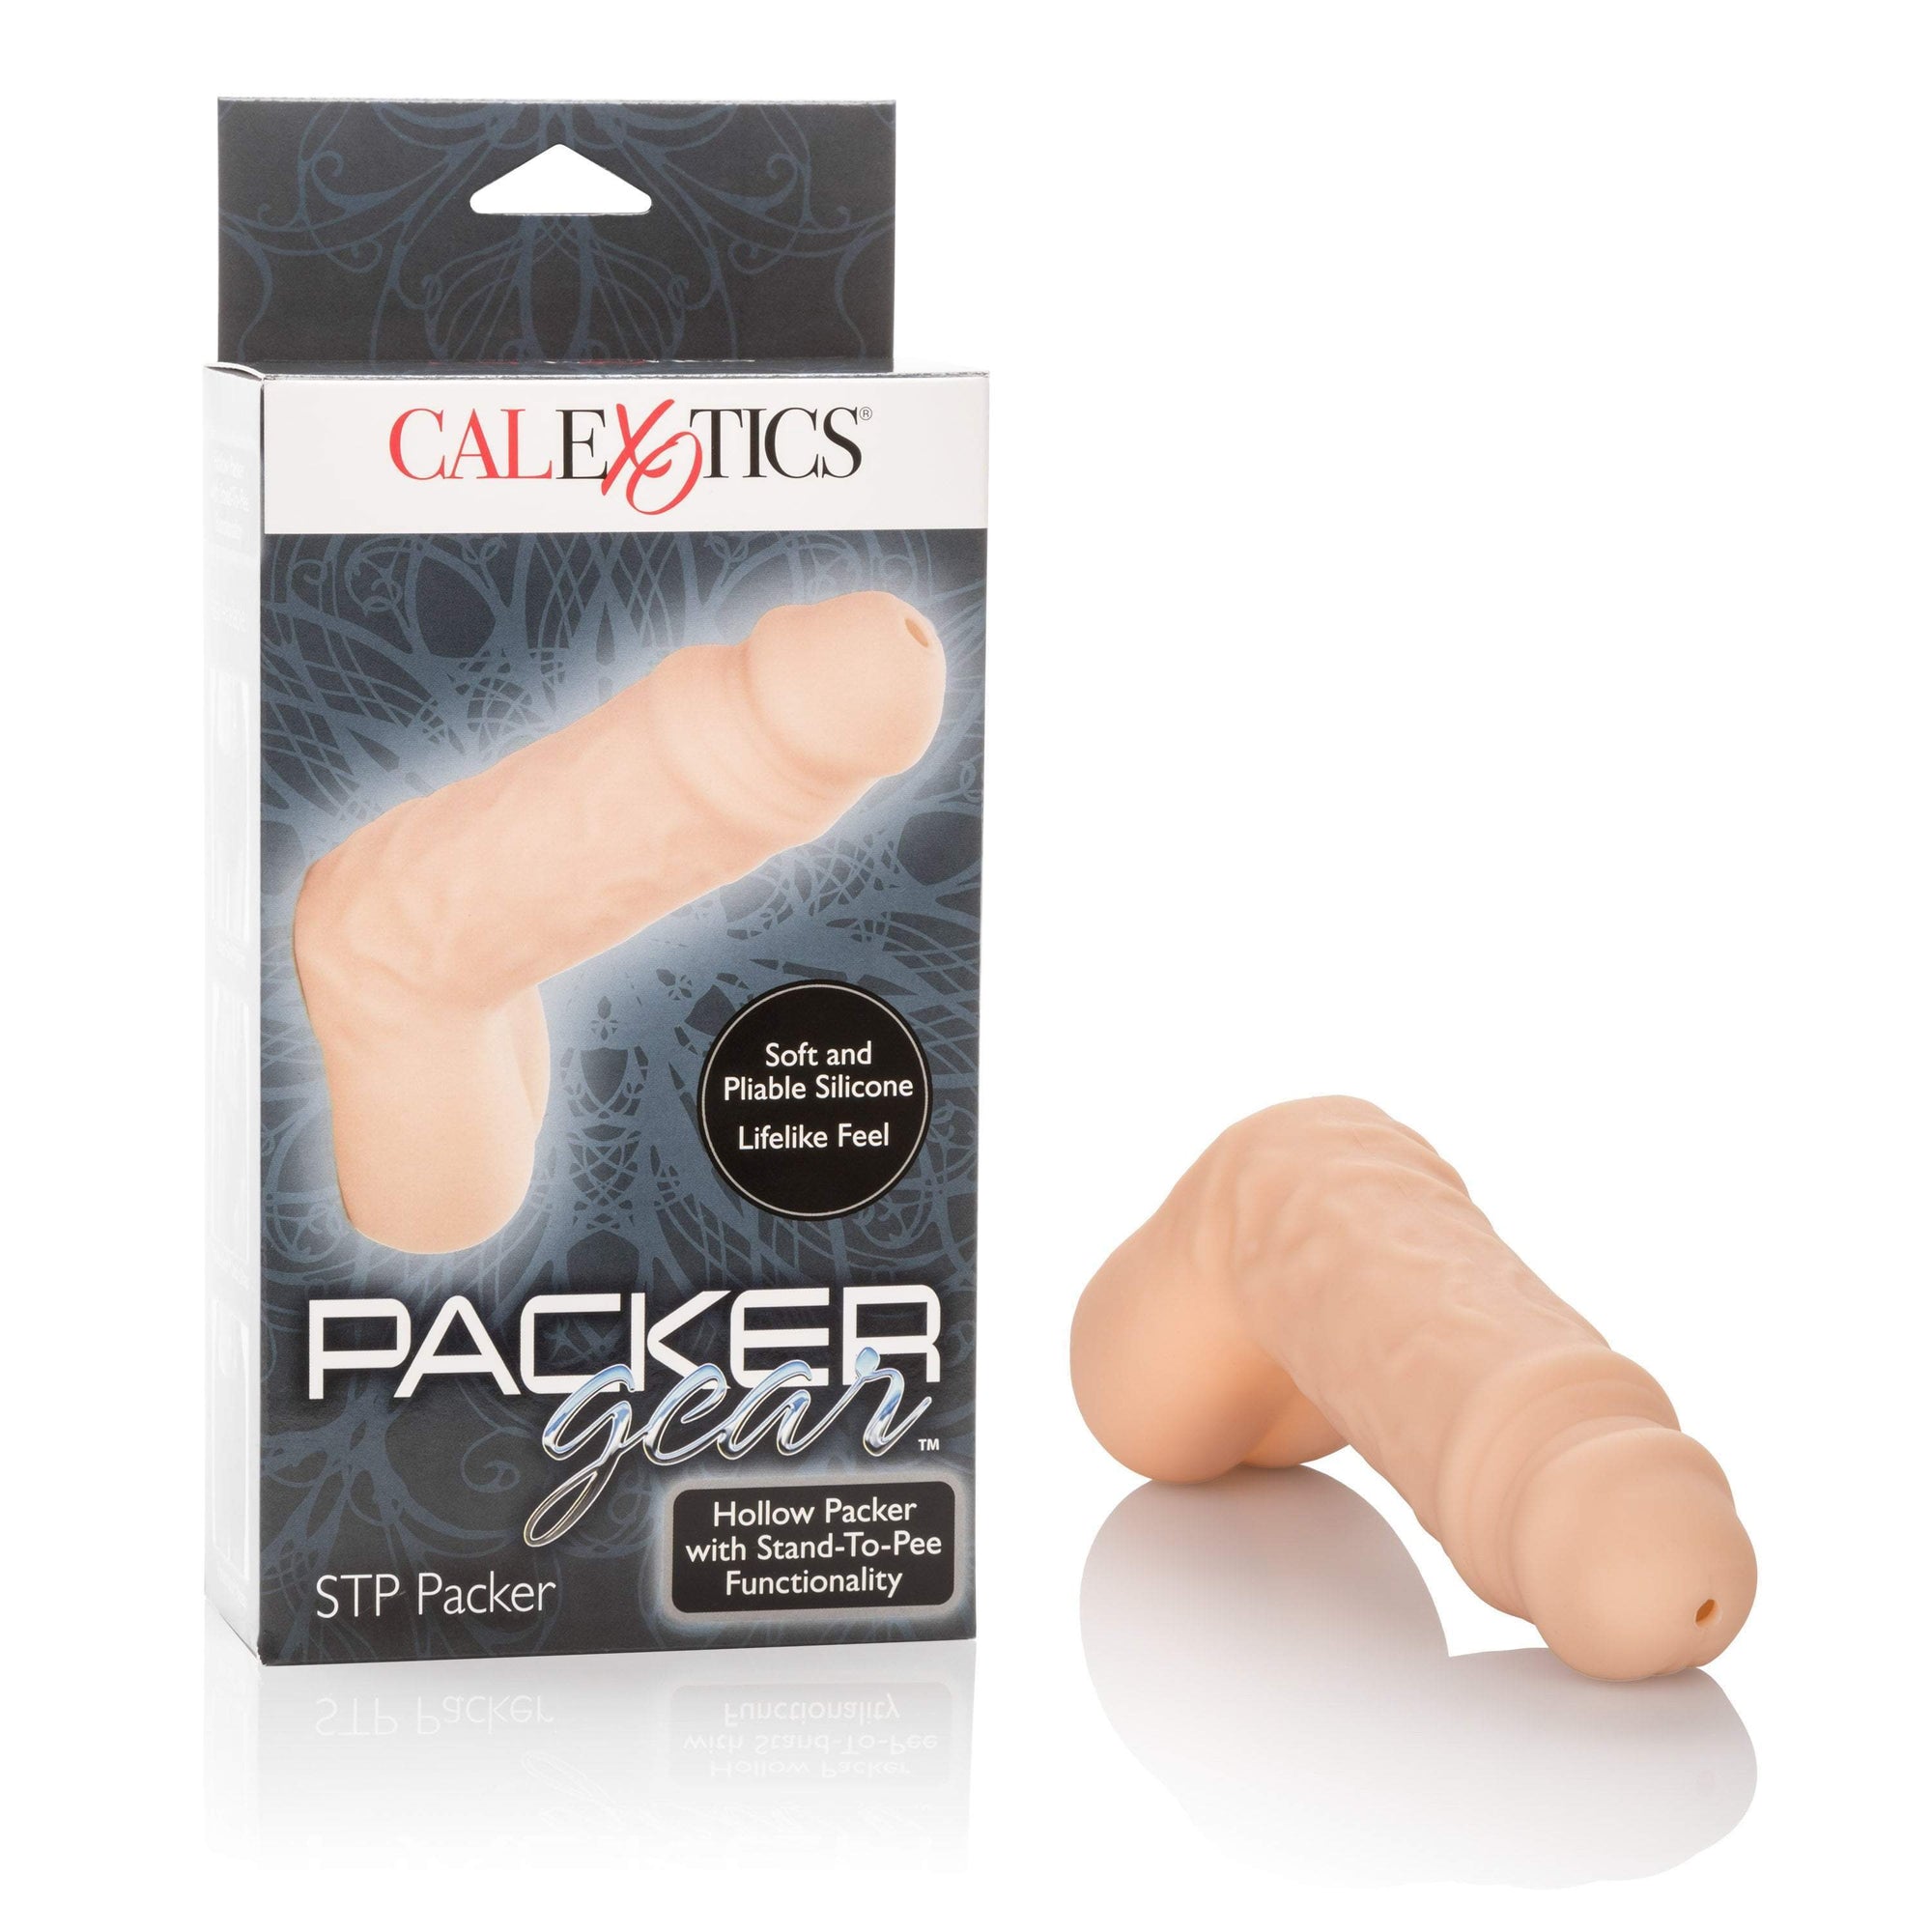 California Exotics - Packer Gear STP Hollow Packer (Beige) Strap On with Hollow Dildo for Male (Non Vibration) Durio Asia